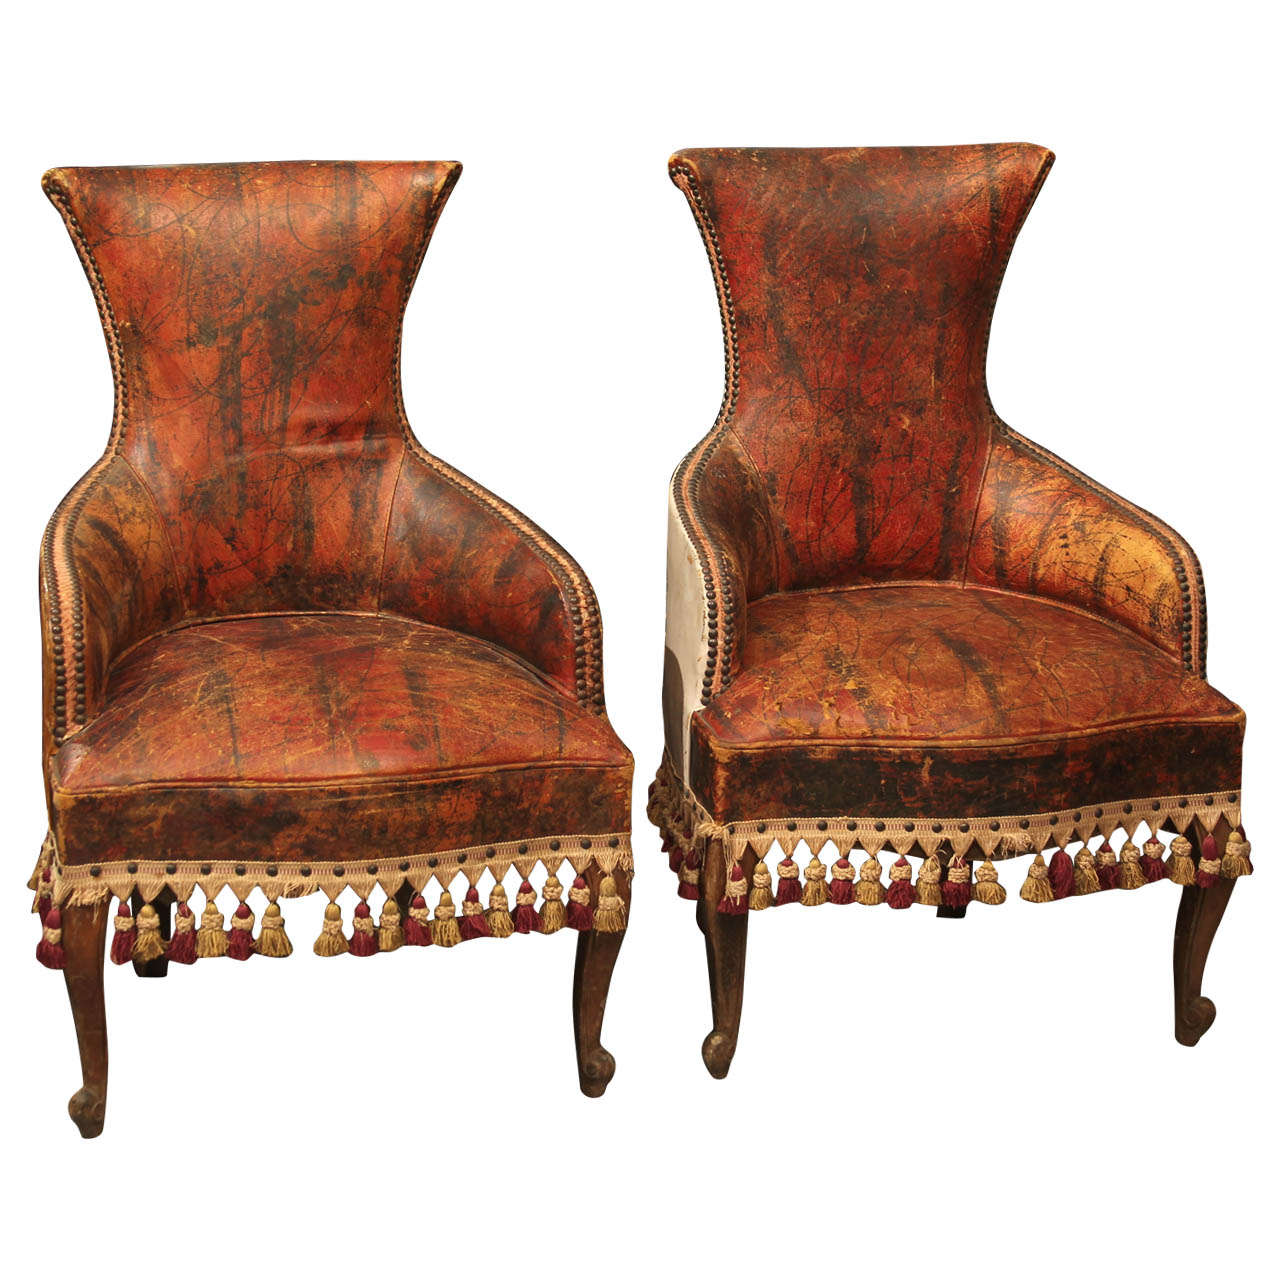 Pair of Marbleized Leather Childs Chairs